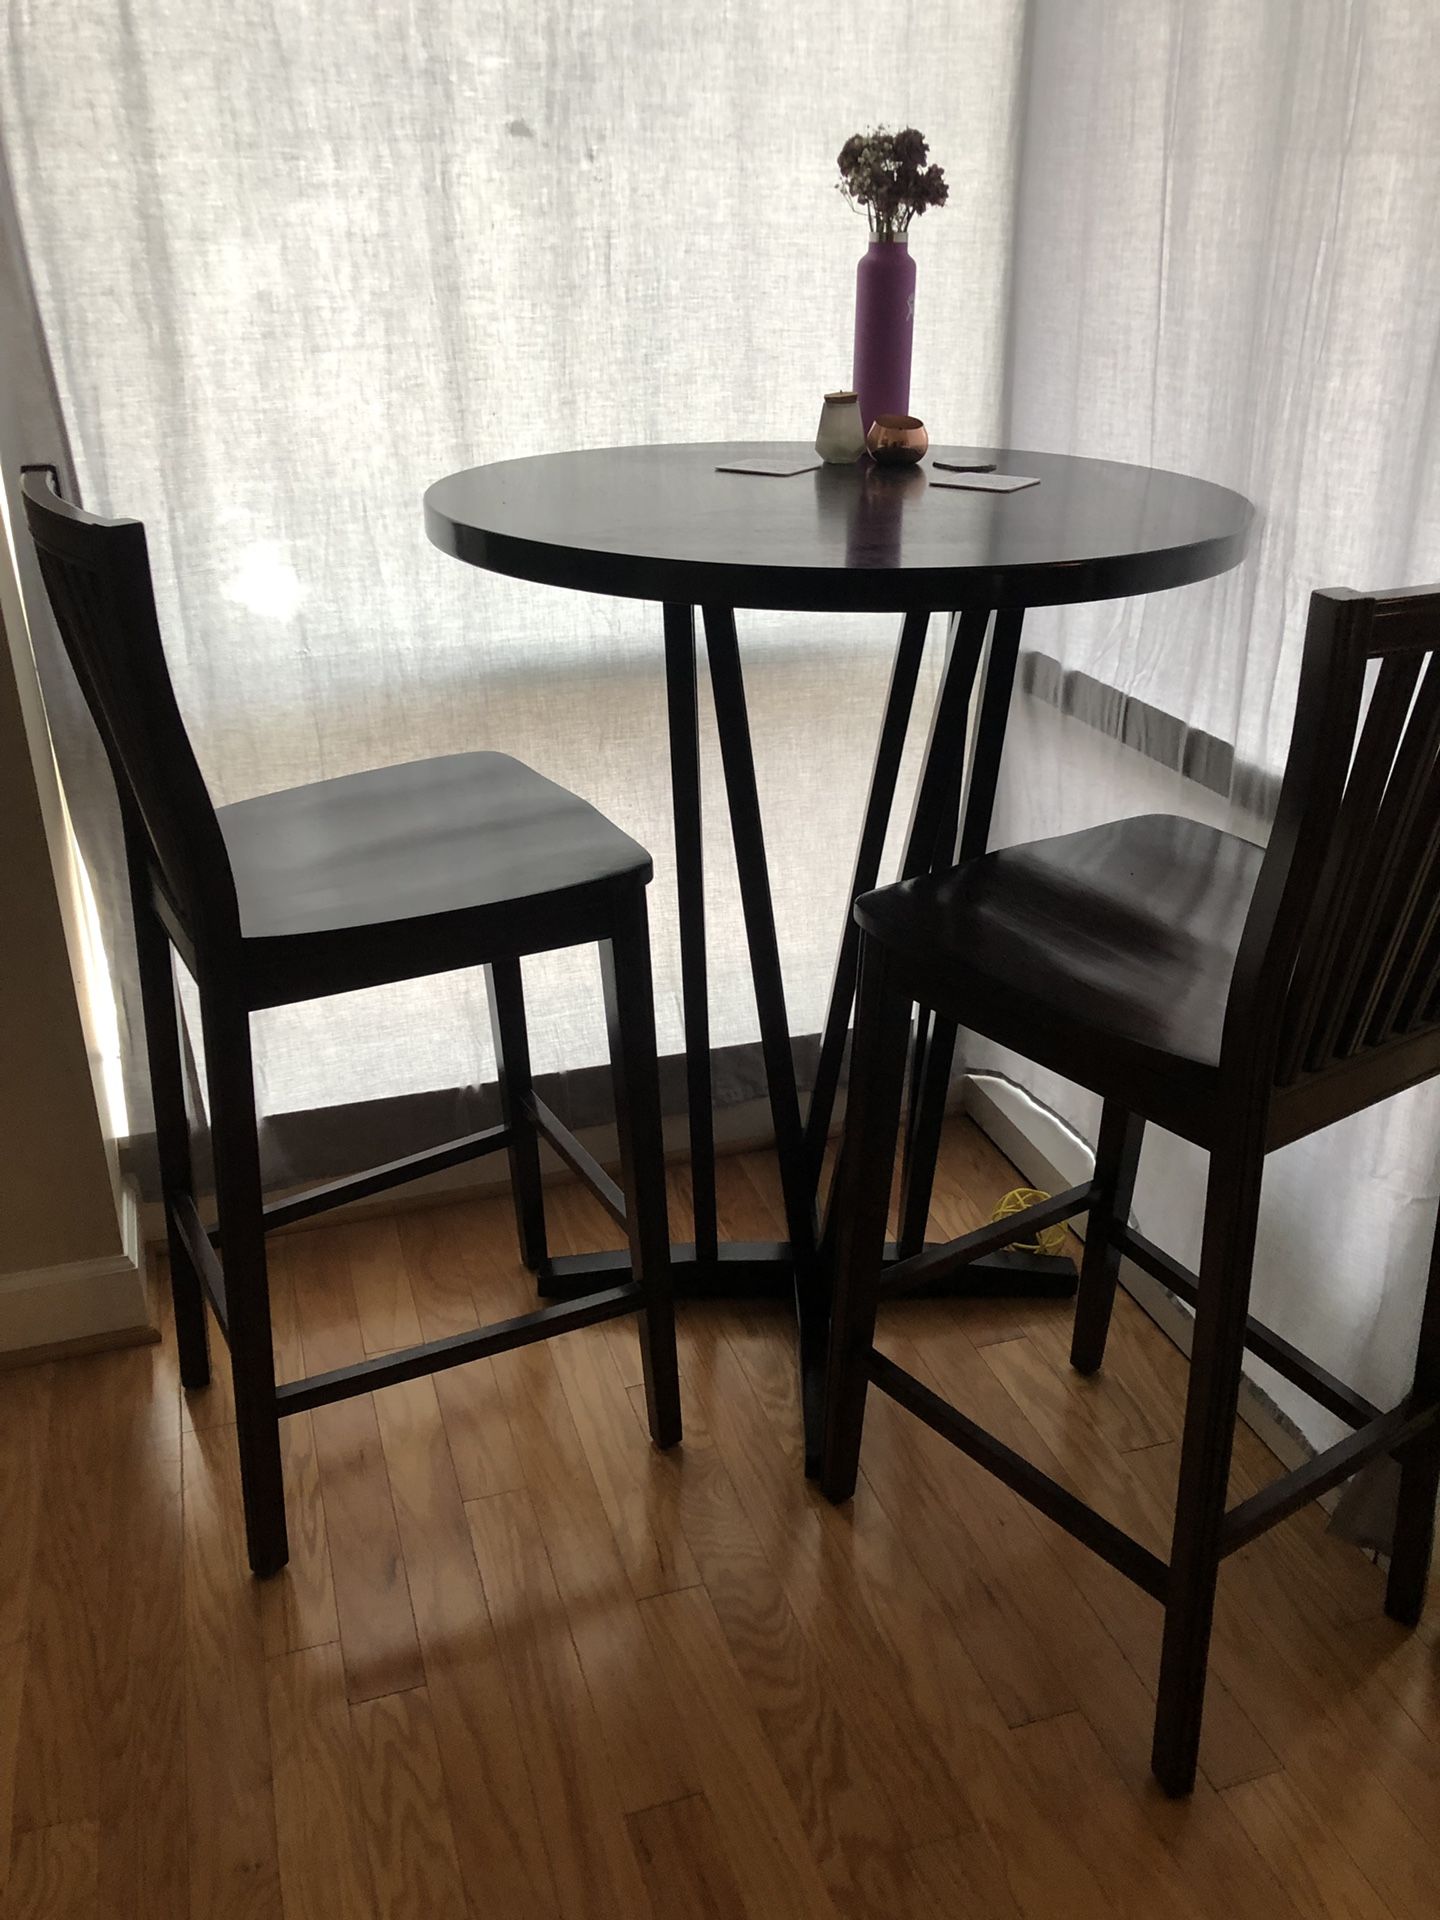 Solid wood bar table + 2 chairs